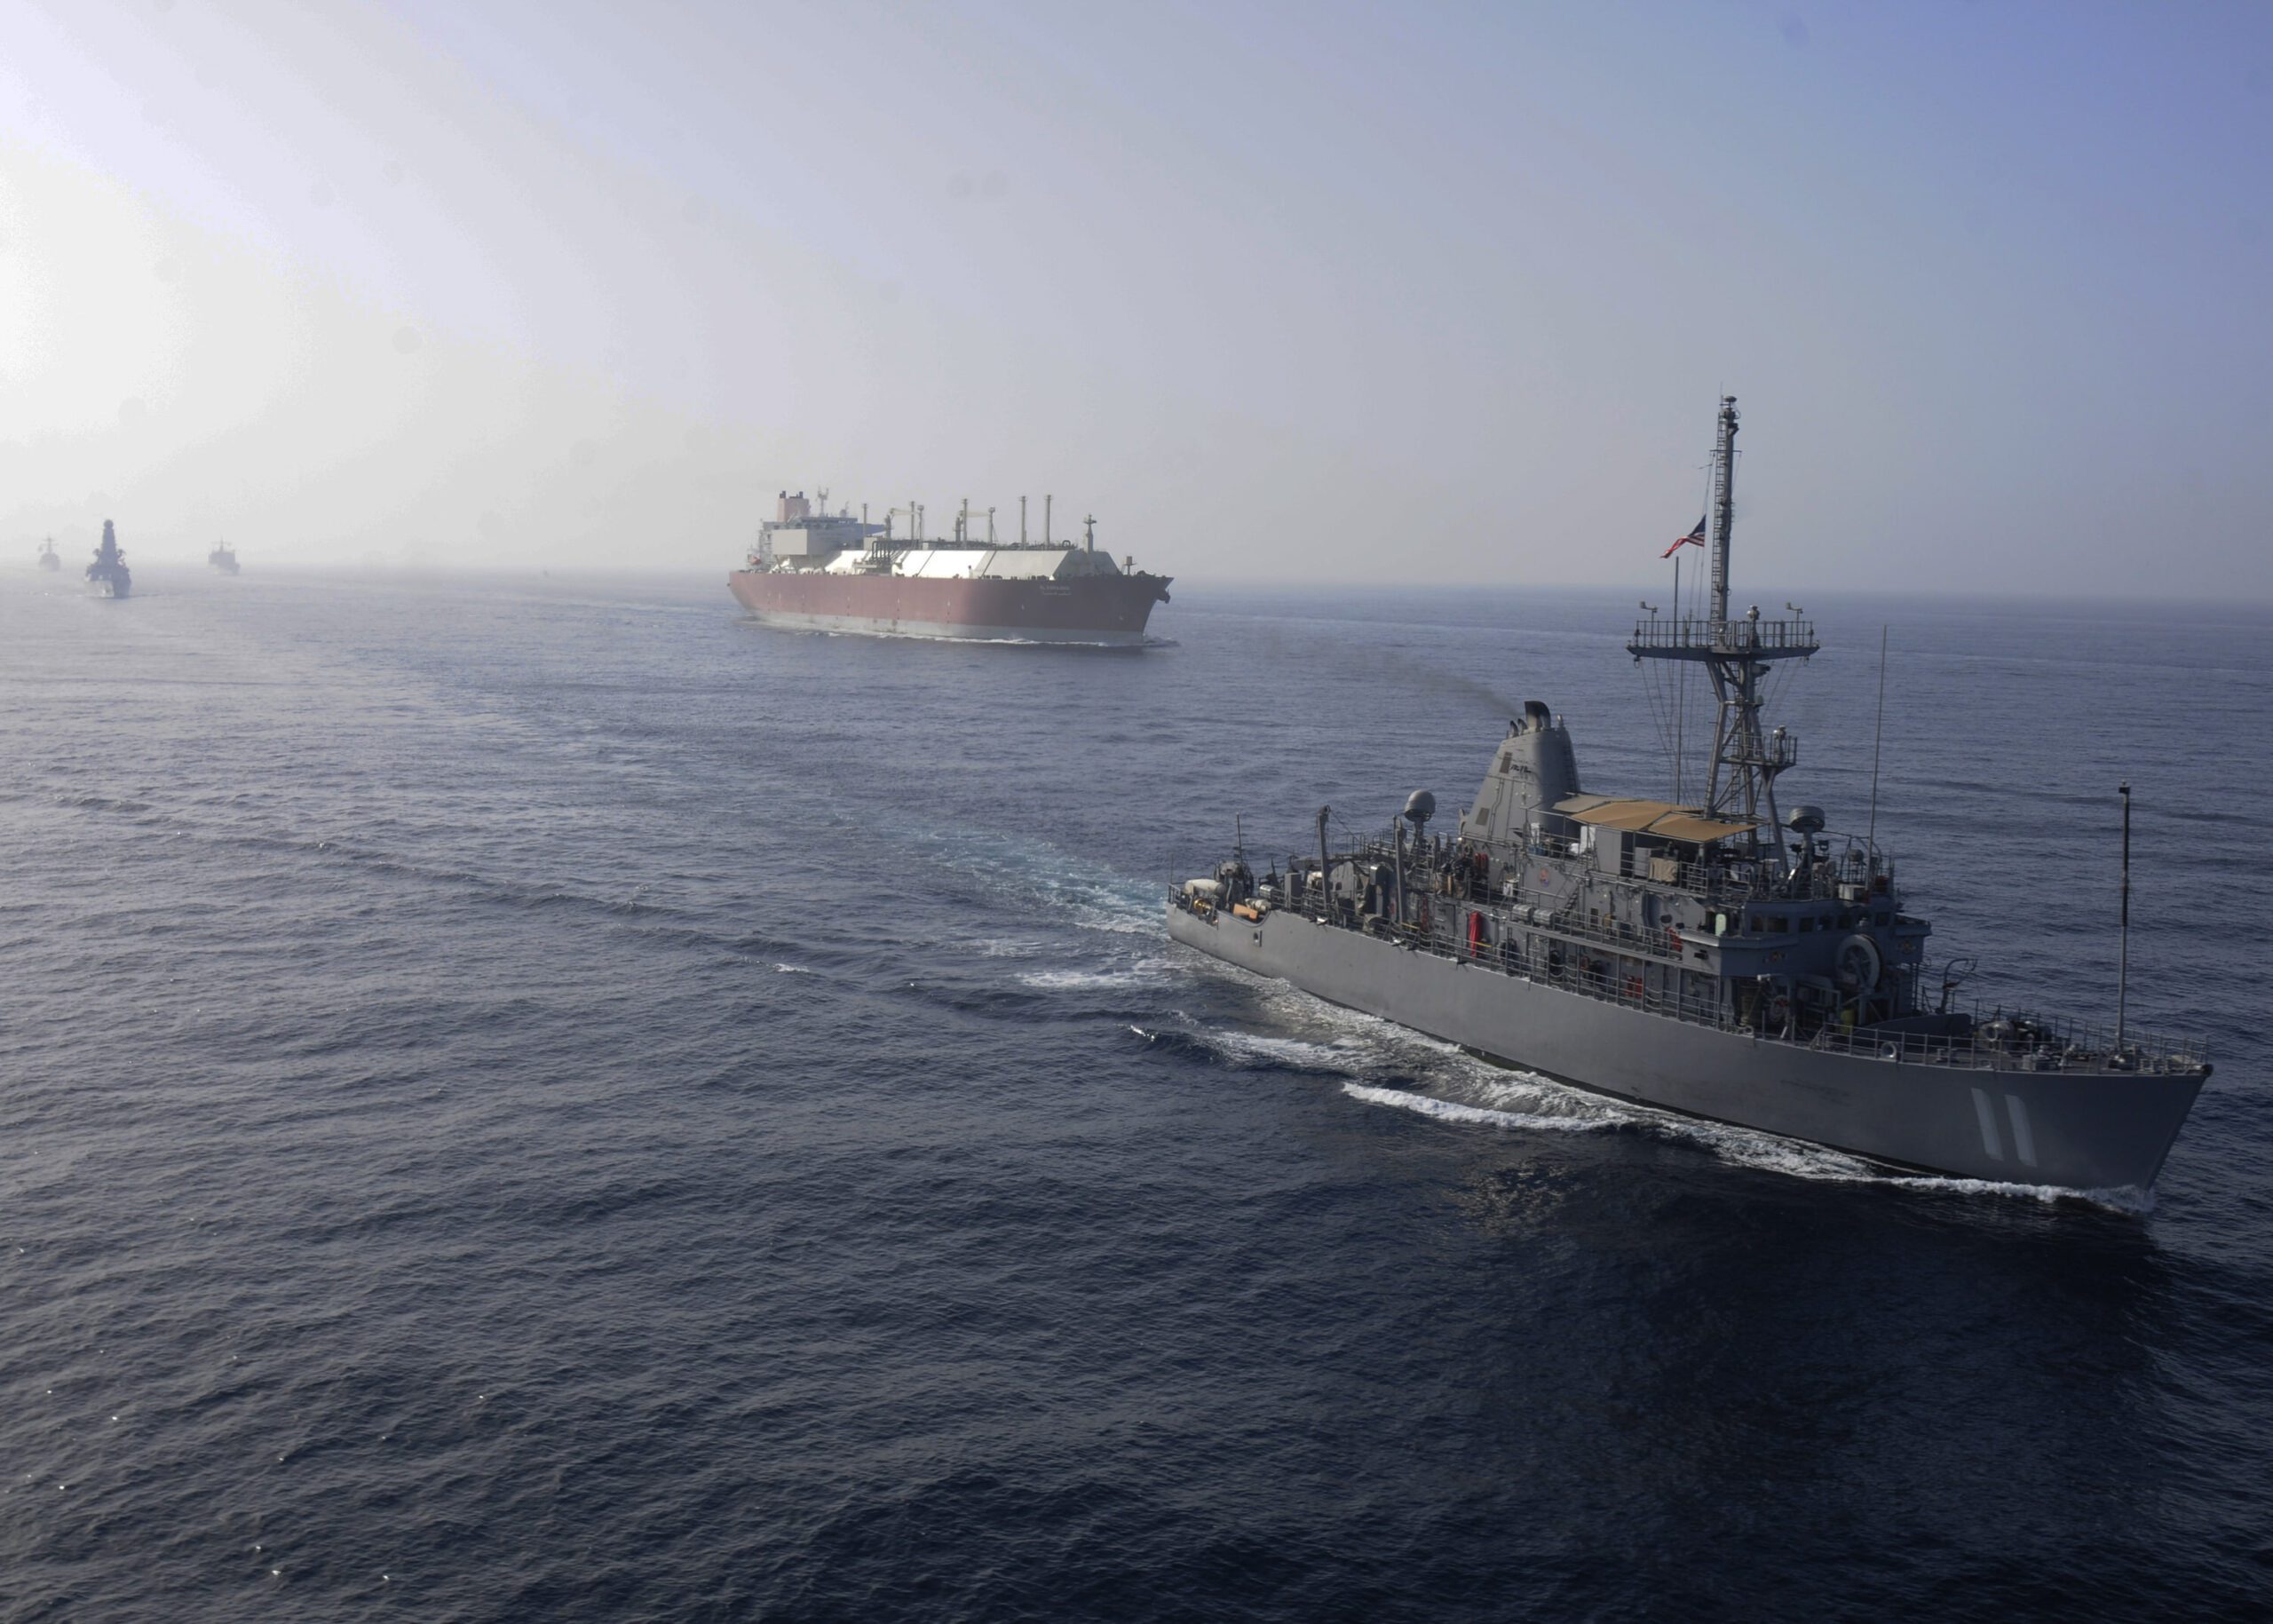 US Navy ship in a convoy with a LNG tanker